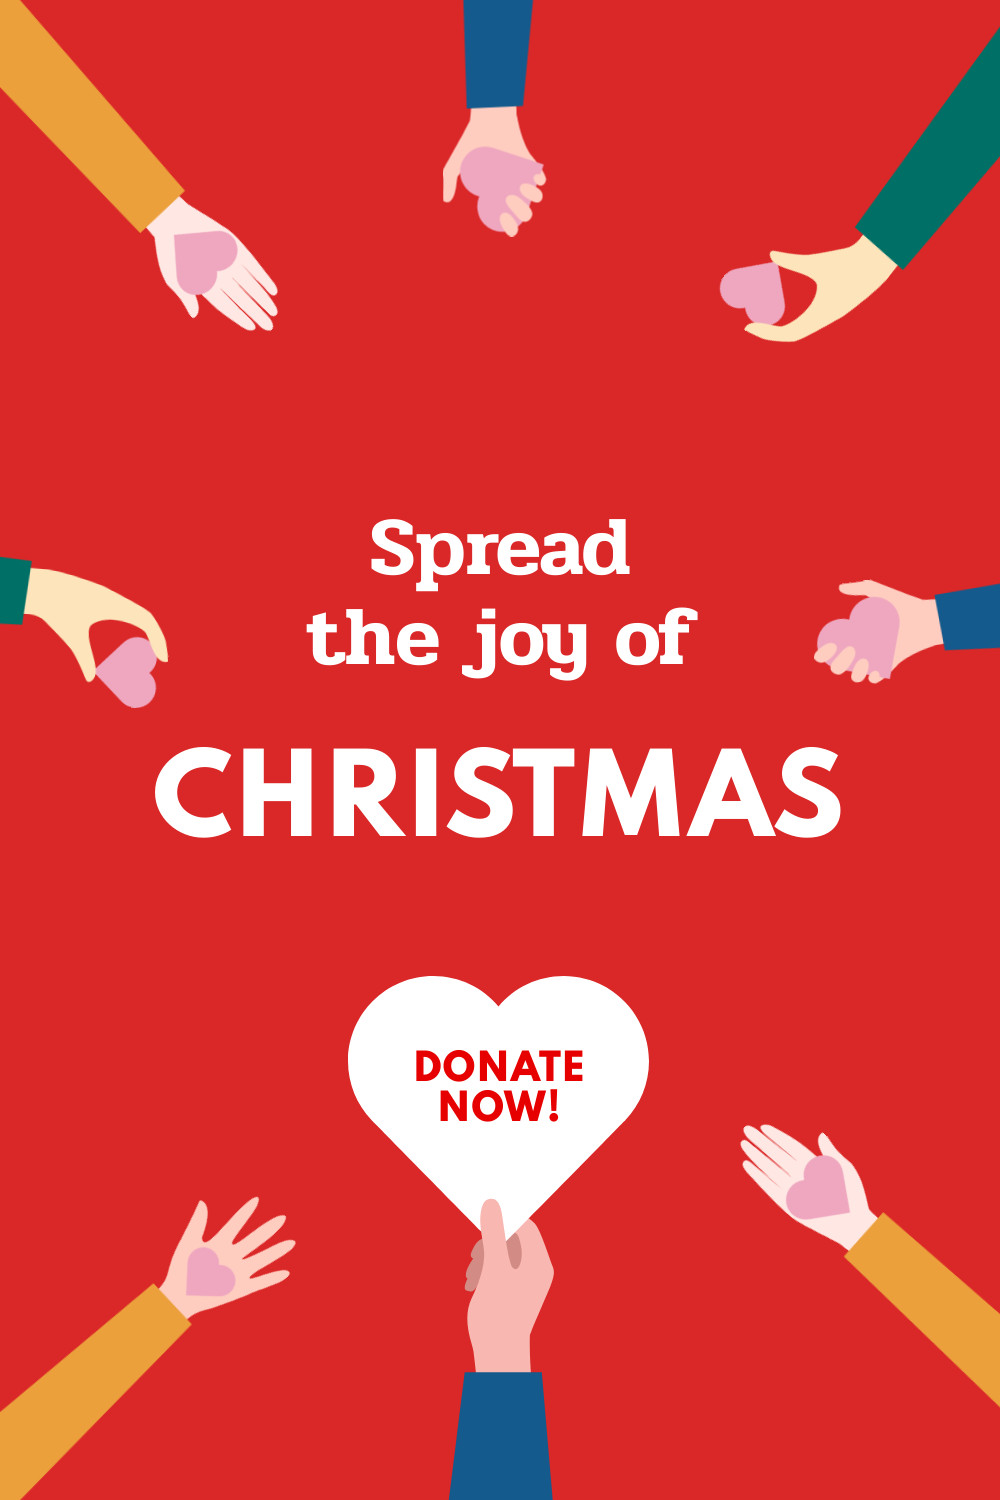 Donate and Spread the Joy of Christmas Facebook Cover 820x360